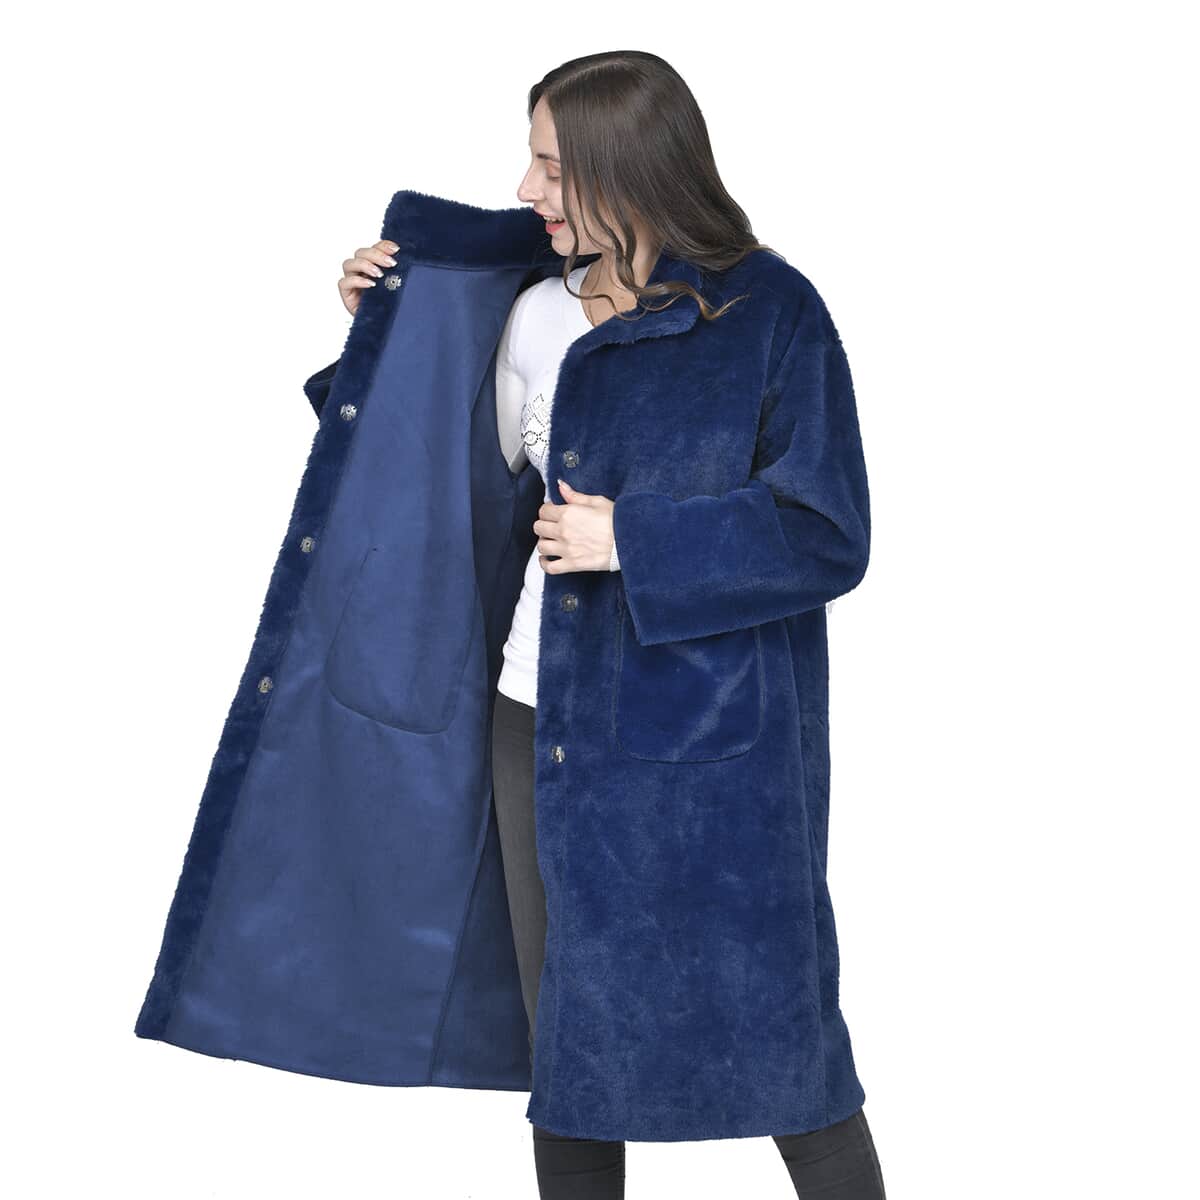 Tamsy Blue Suede and Polyester Faux Fur Long Coat For Ladies, Ultra-Soft Quick Drying Machine Washable Womens Winter Coat- M image number 3